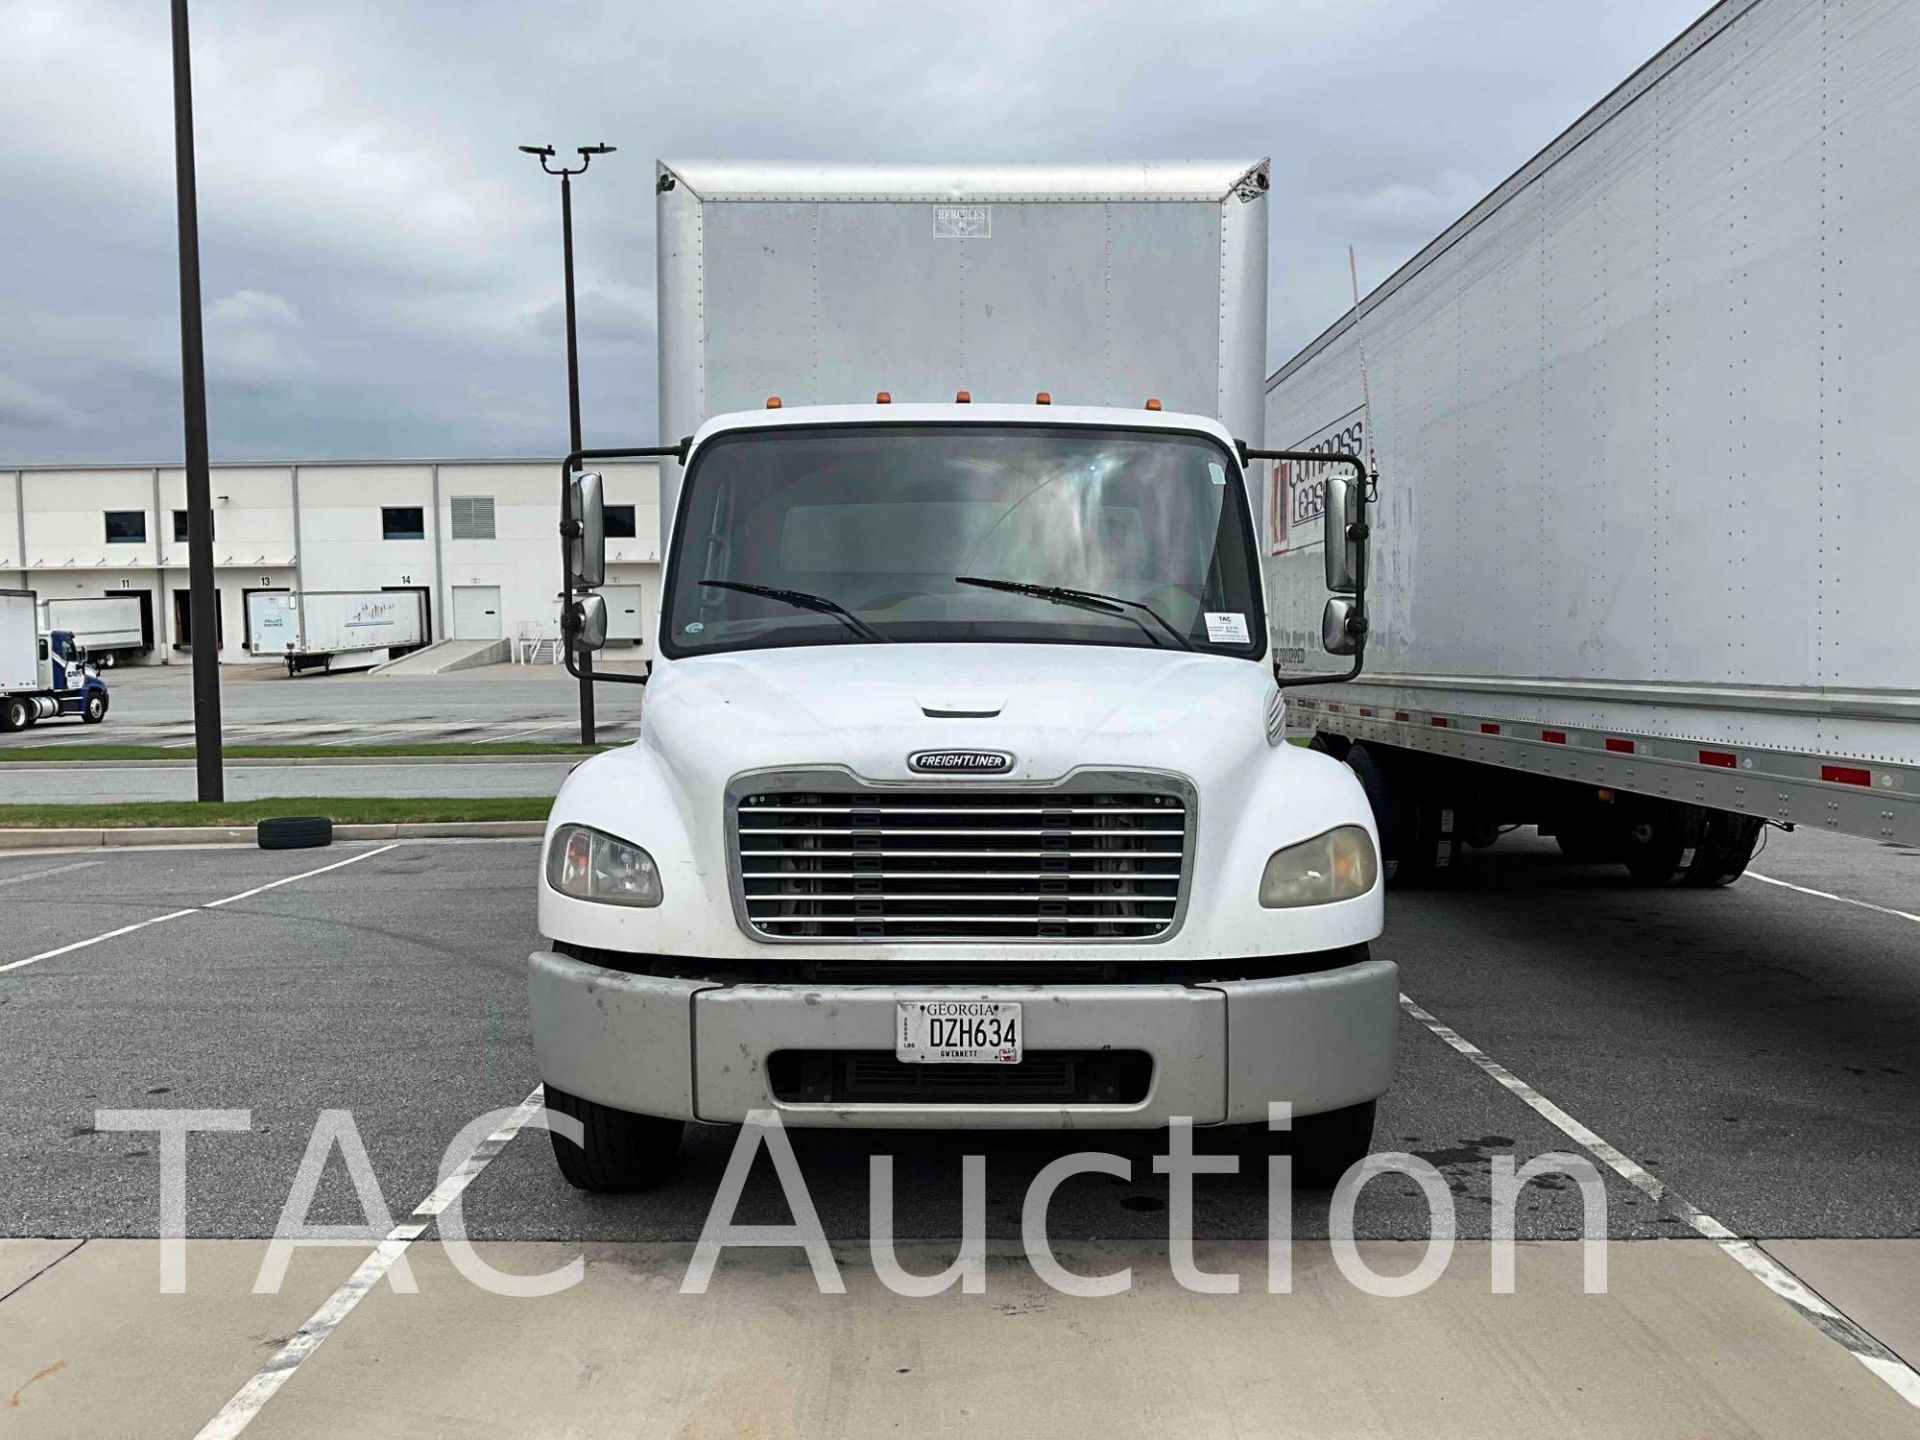 2008 Freightliner M2 Business Class 26ft Box Truck - Image 2 of 75